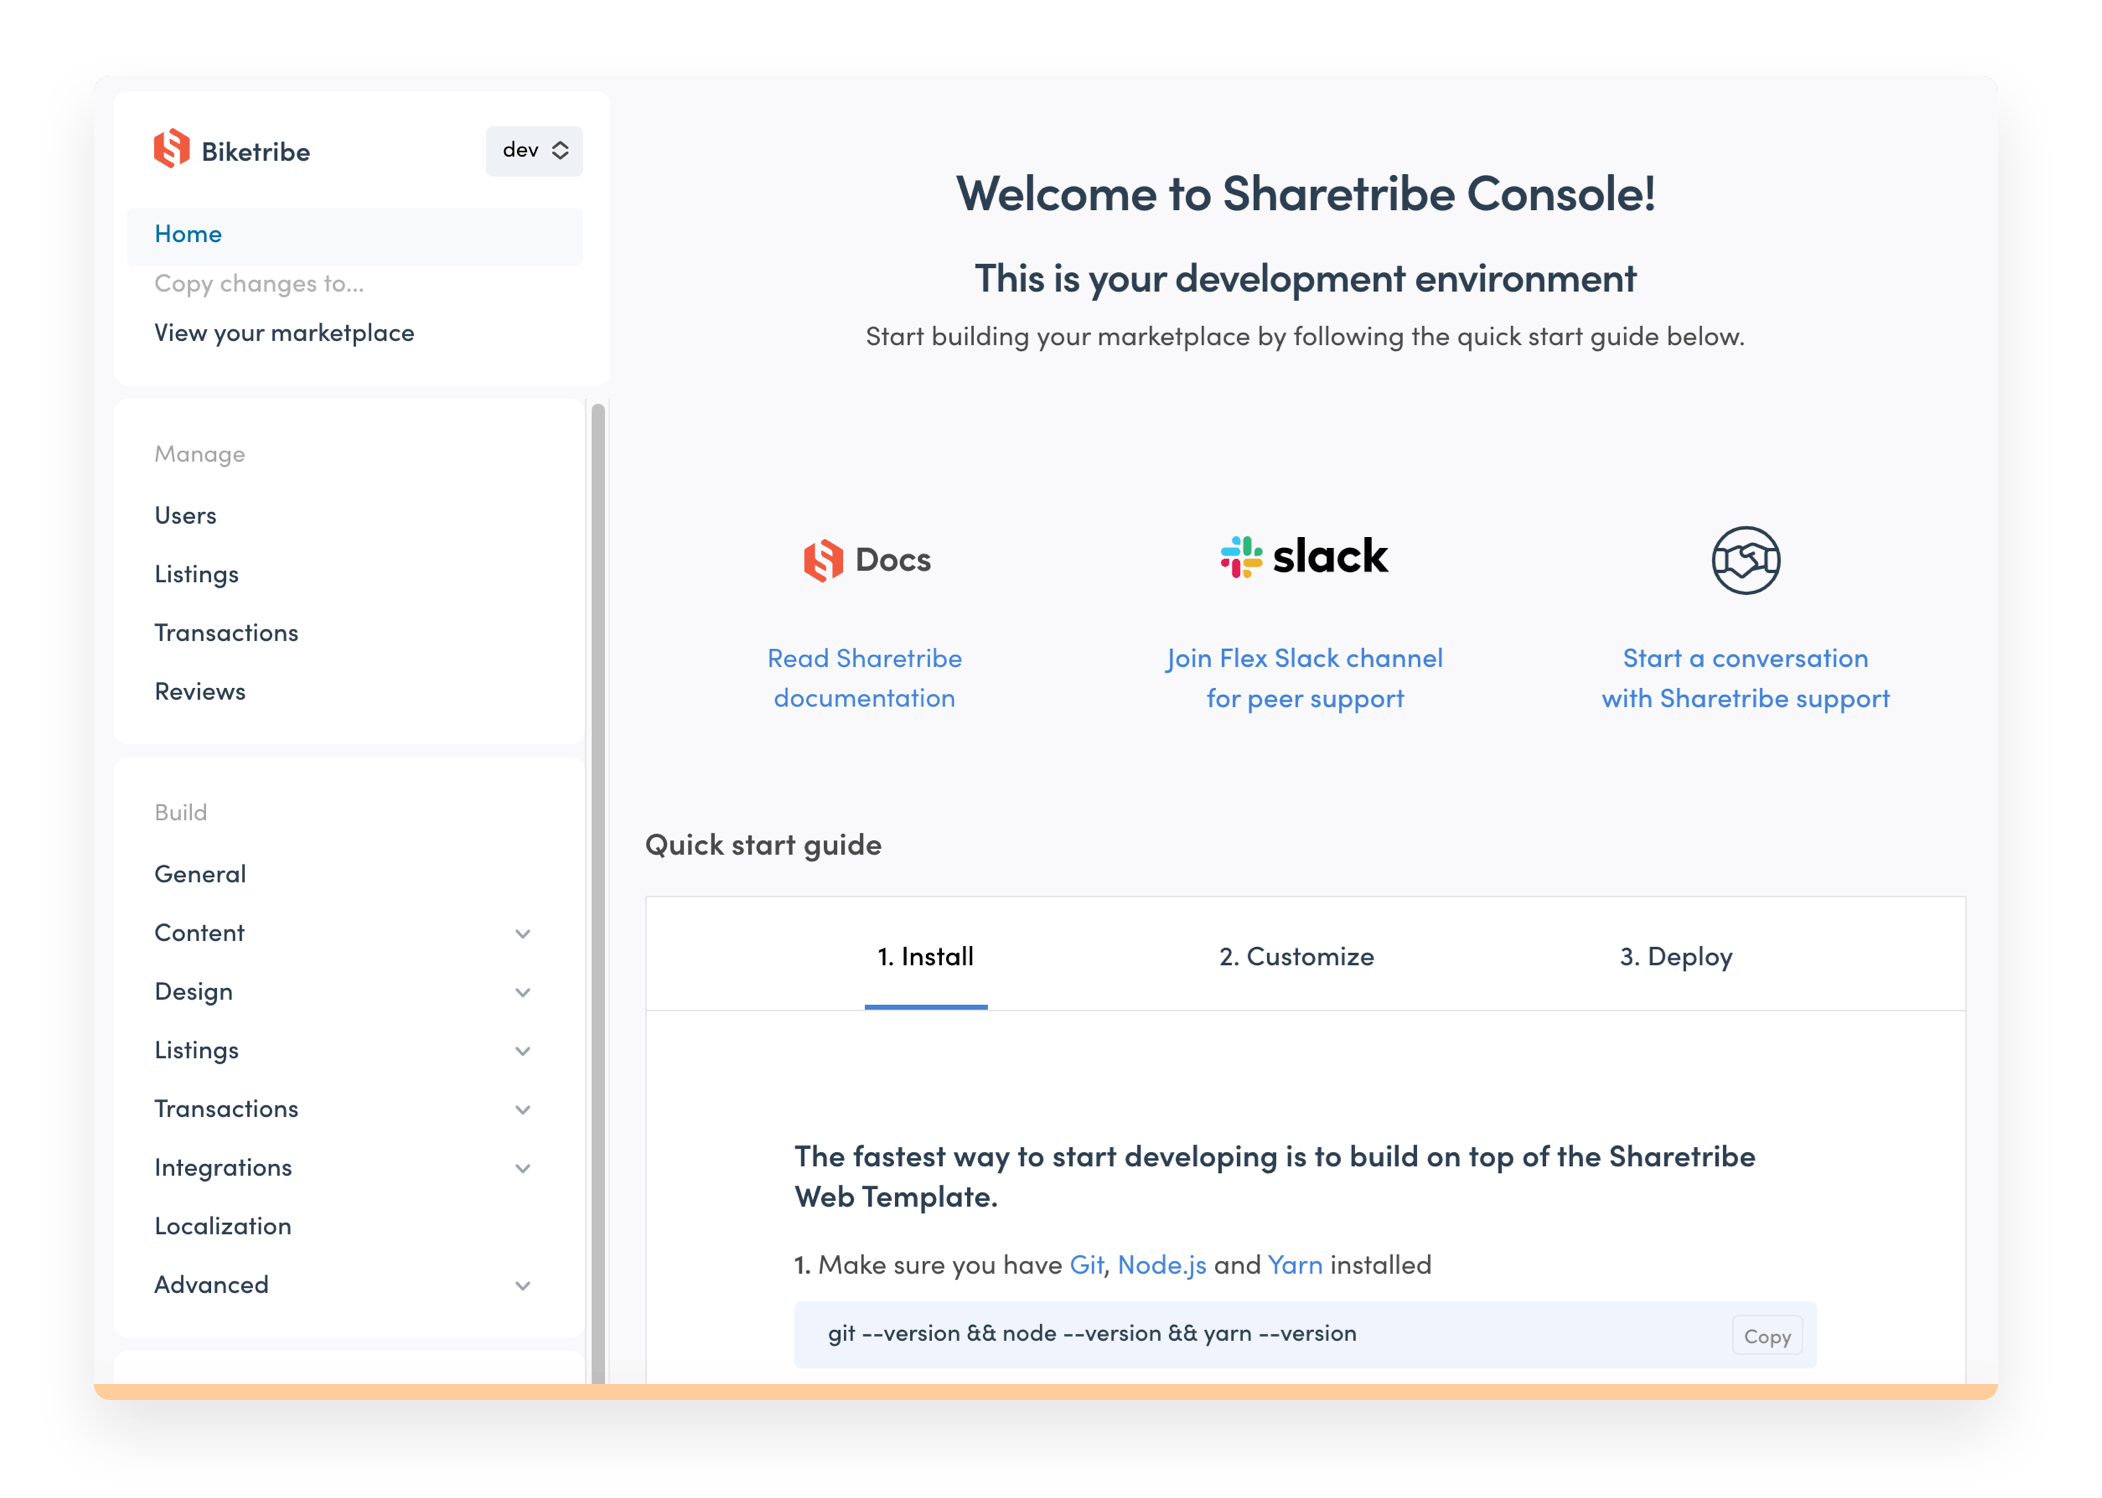 The Sharetribe Console development environment welcome page with links to documentation, Slack, and support. On the left, a sidebar with all the tools.